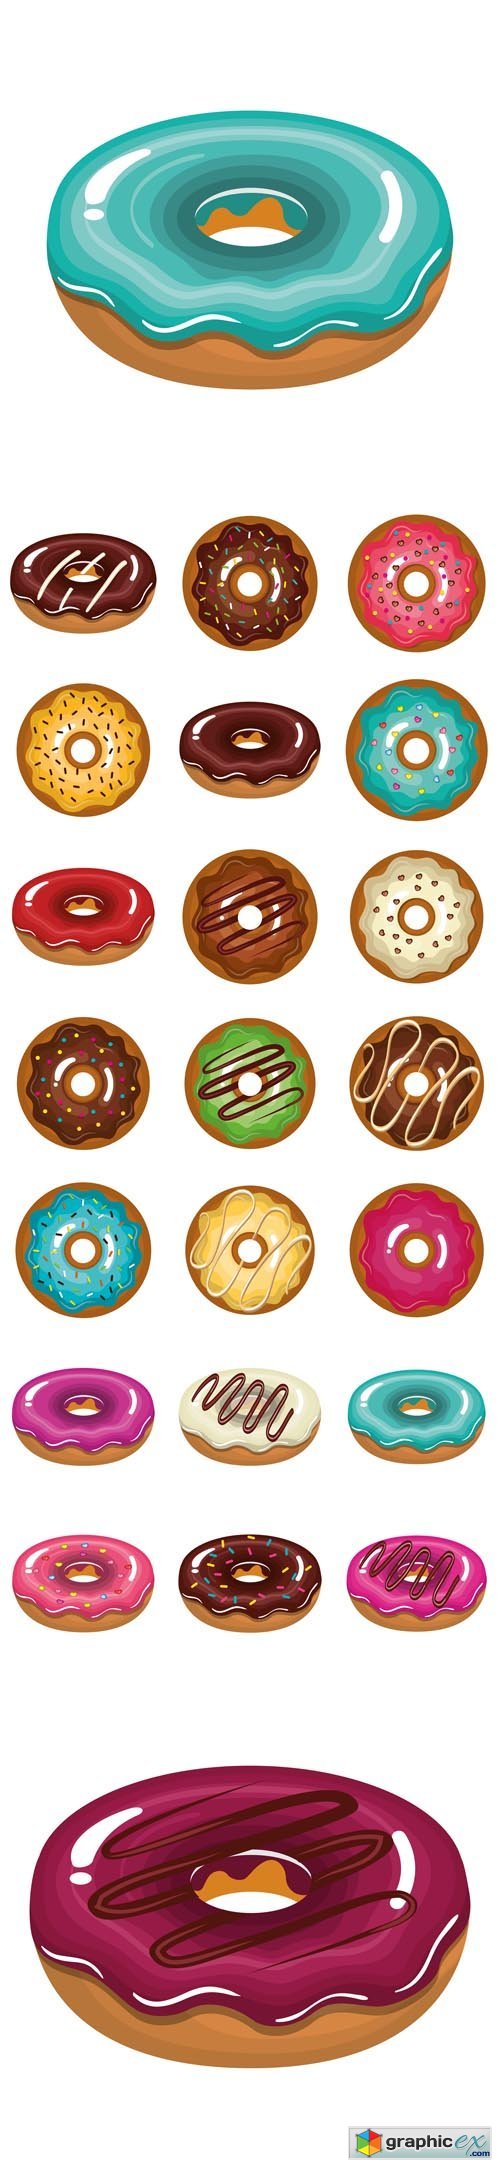 Delicious Sweet Donuts Icons